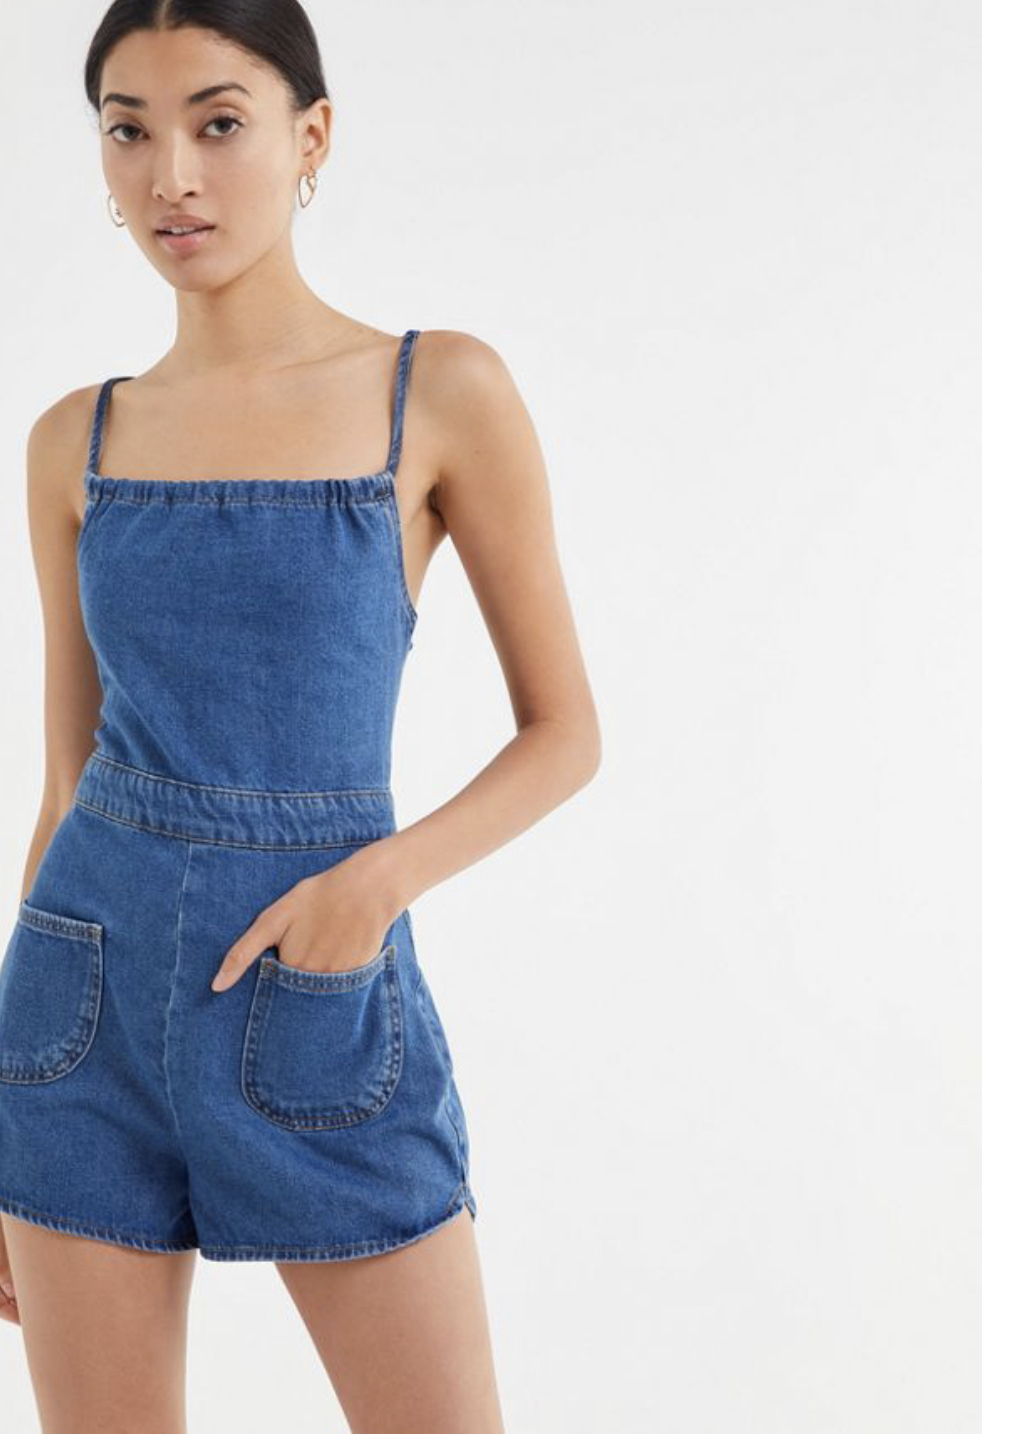 Urban outfitters .PNG